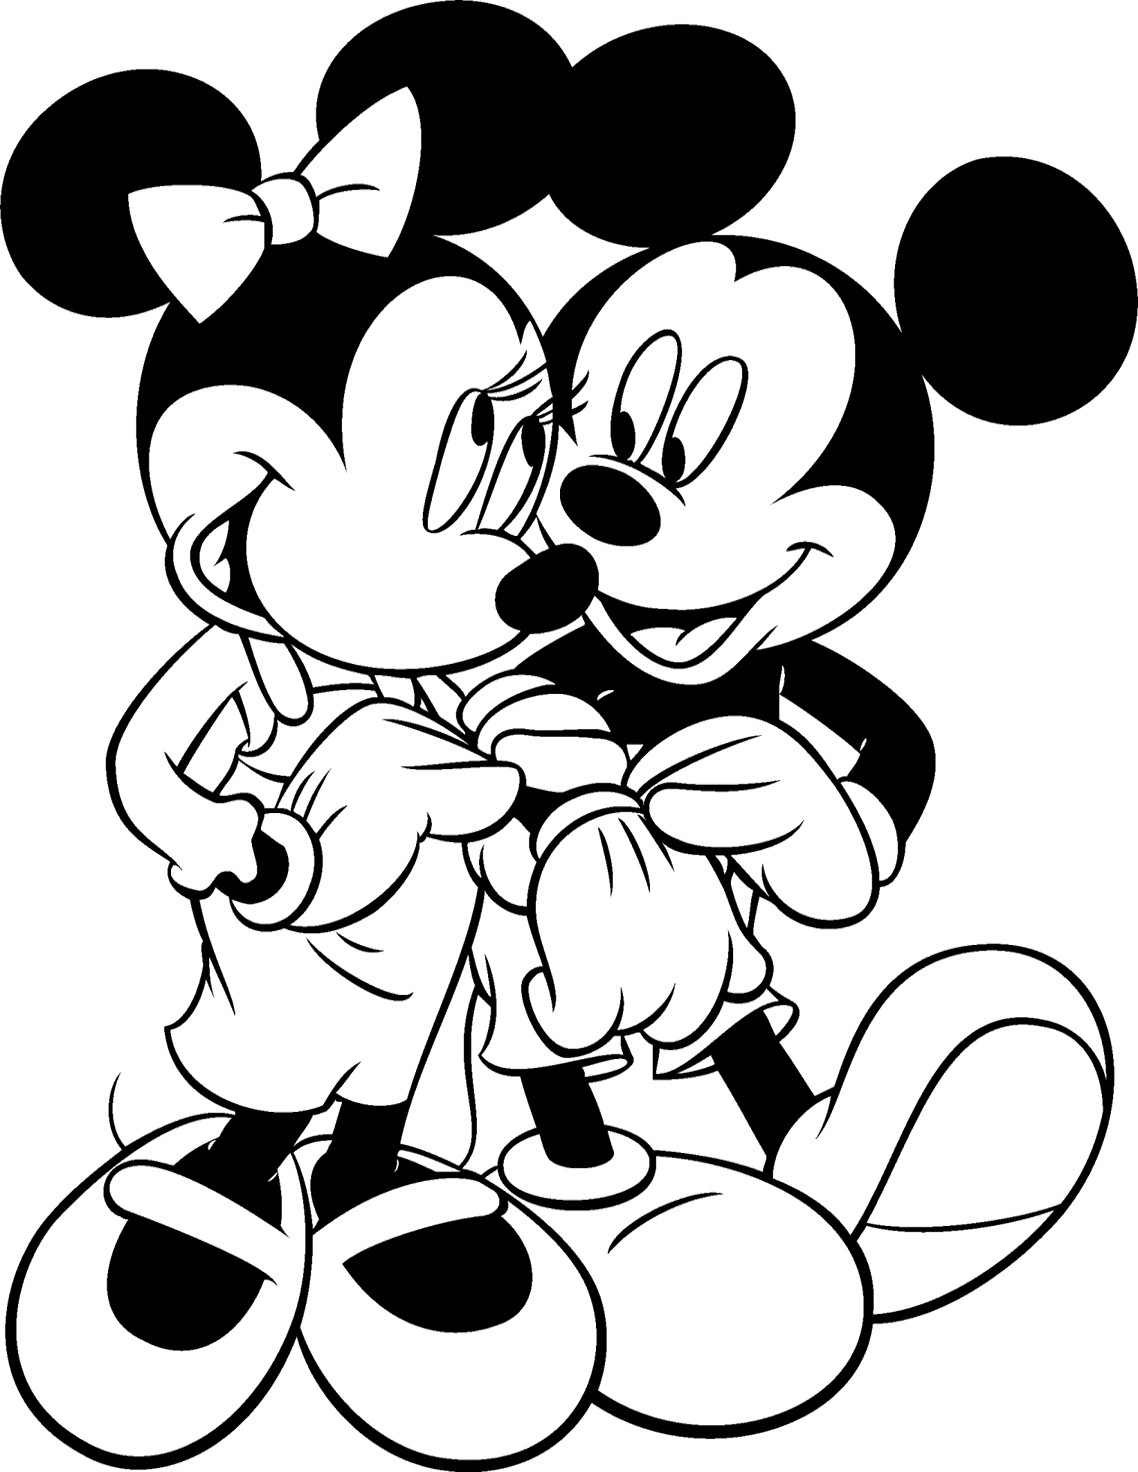 Mickey Mouse Coloring Pages at GetColorings.com | Free printable